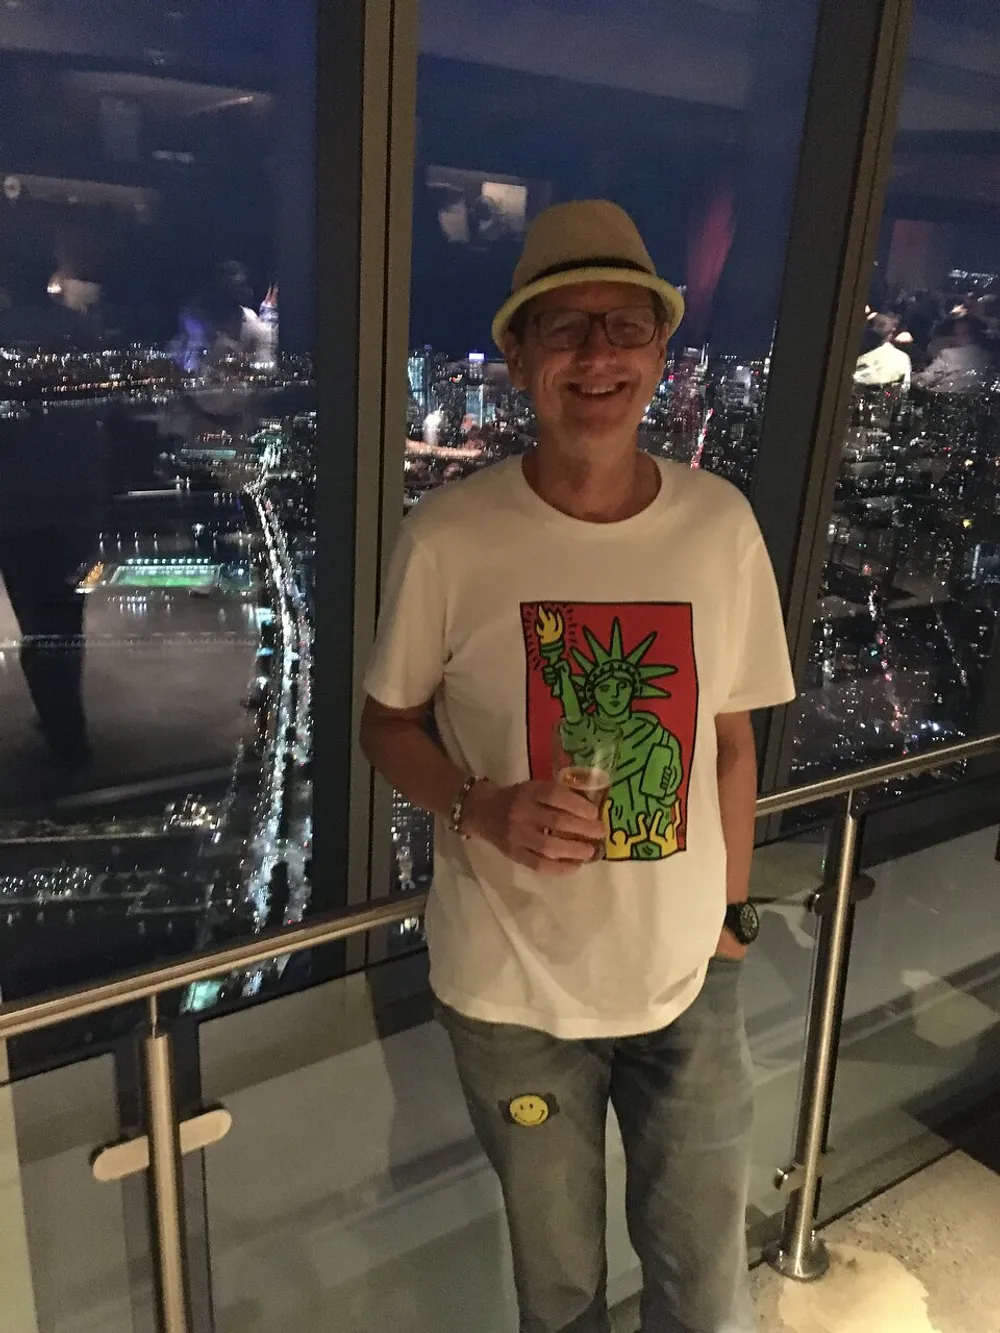 A smiling person wearing a hat and a T-shirt with a colorful graphic stands indoors with a night cityscape visible through large windows in the background